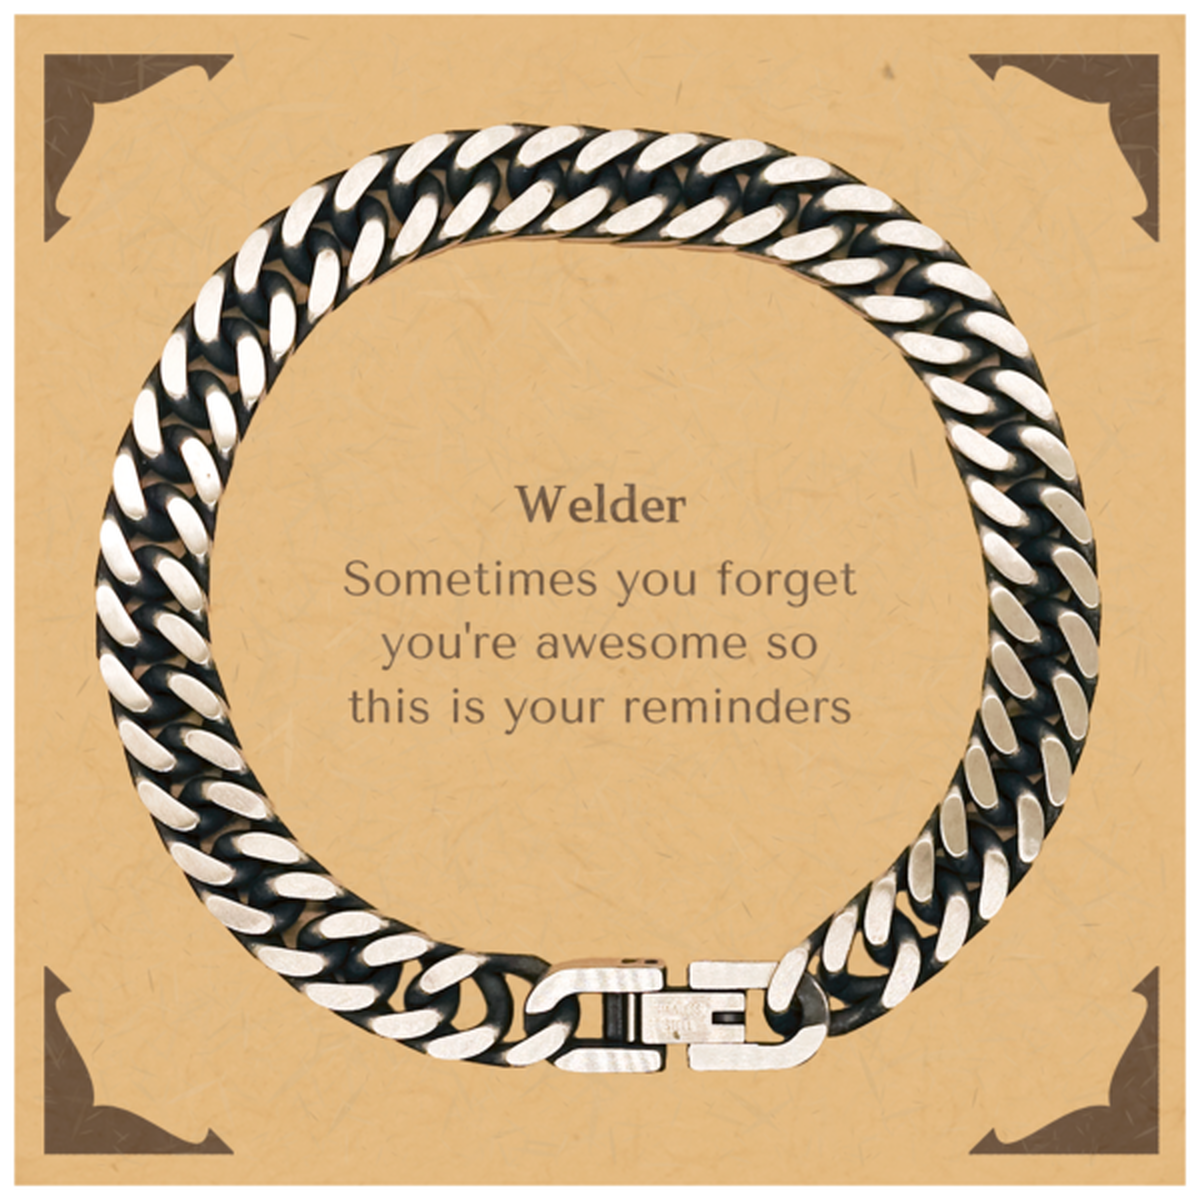 Sentimental Welder Cuban Link Chain Bracelet, Welder Sometimes you forget you're awesome so this is your reminders, Graduation Christmas Birthday Gifts for Welder, Men, Women, Coworkers